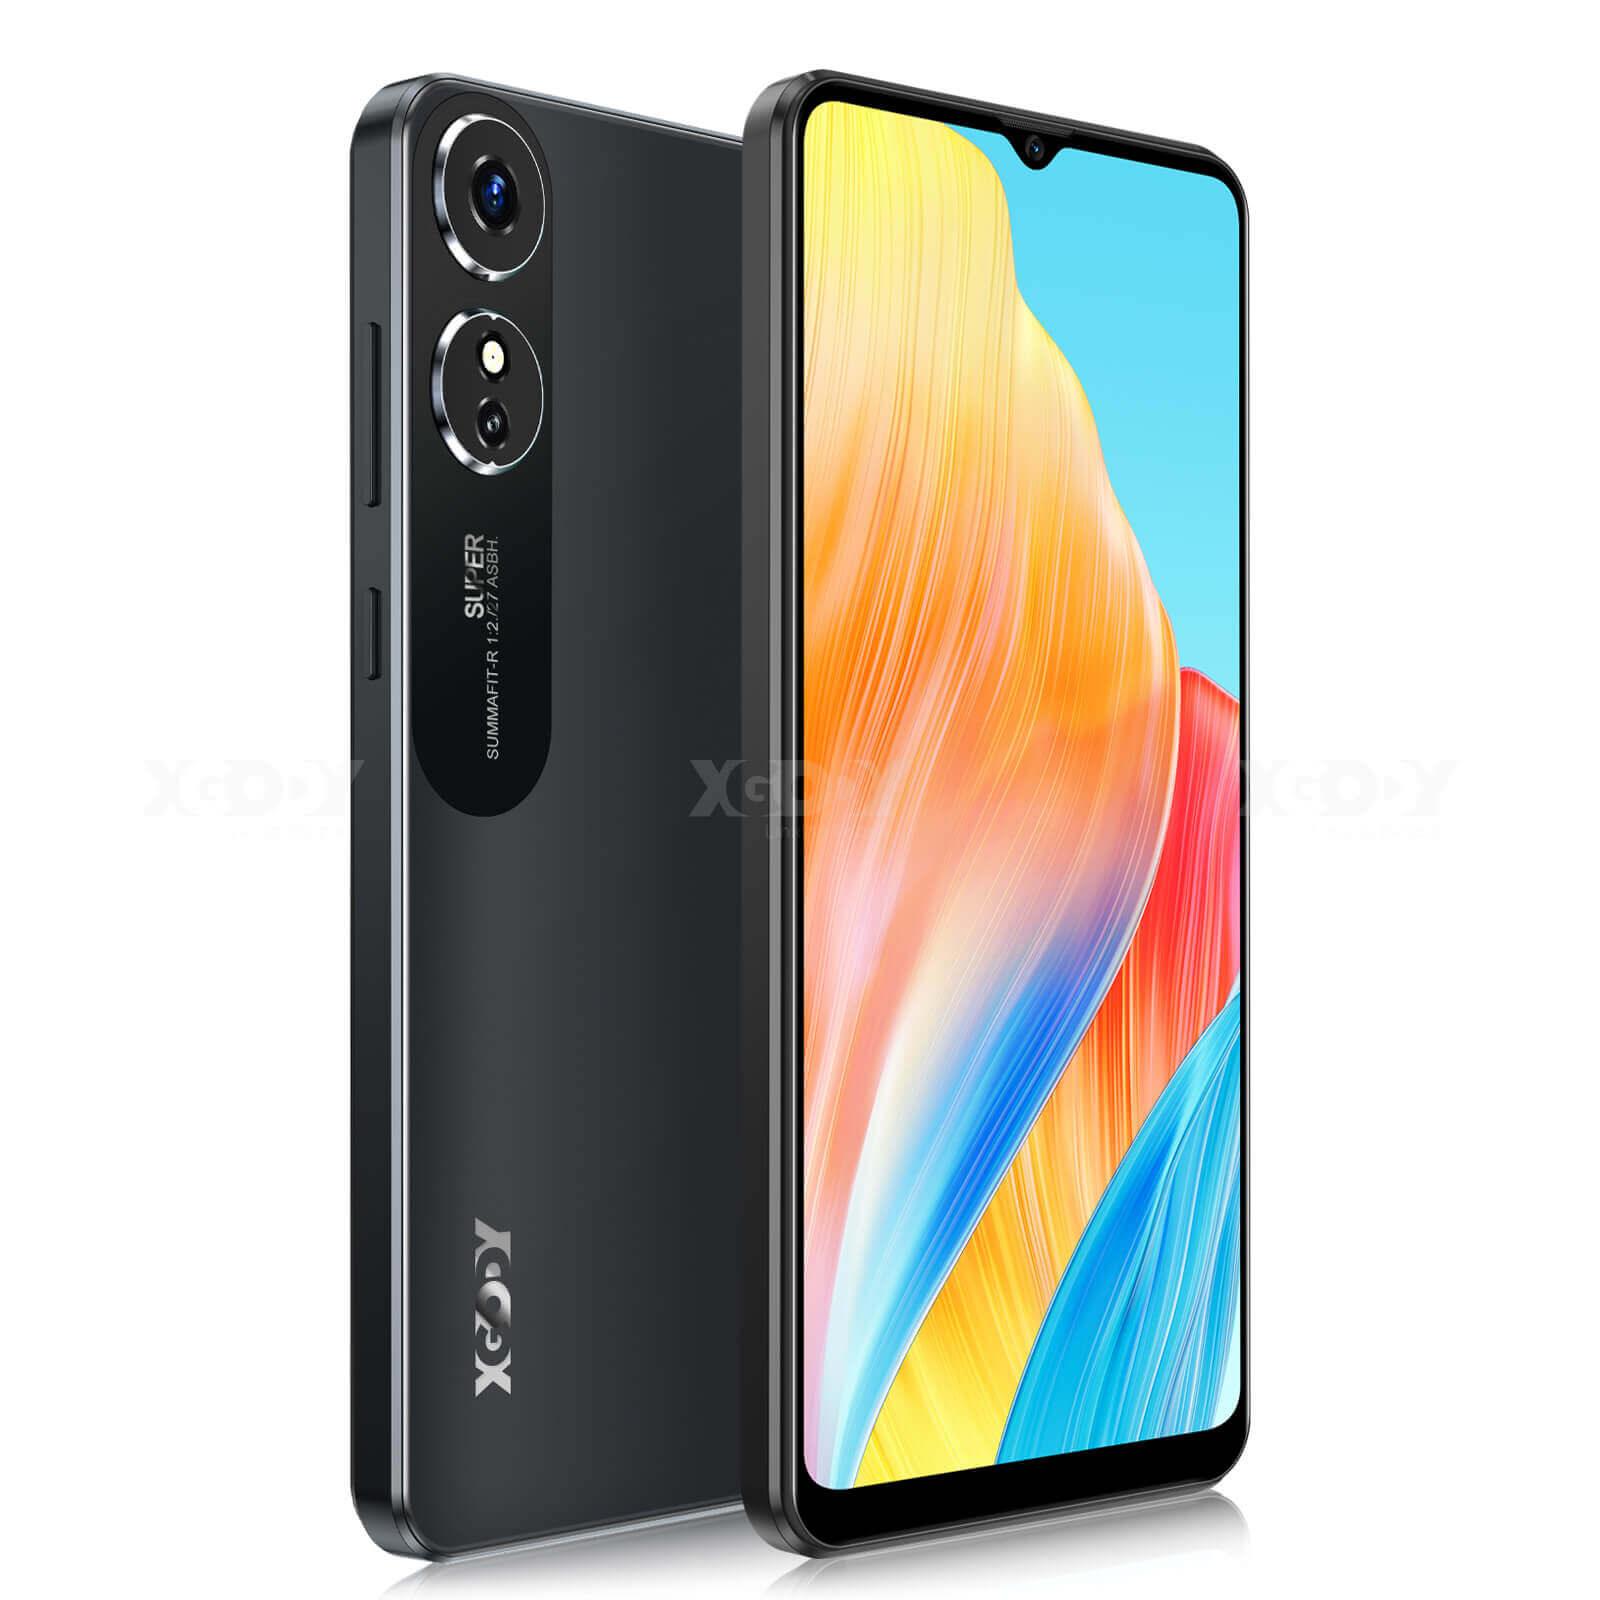 Cost-effective and Most worthwhile XGODY Mate40 Pro | 6.5" HD Display, Android 9.0, 500MP Dual Cameras, Face Unlock - XGODY 